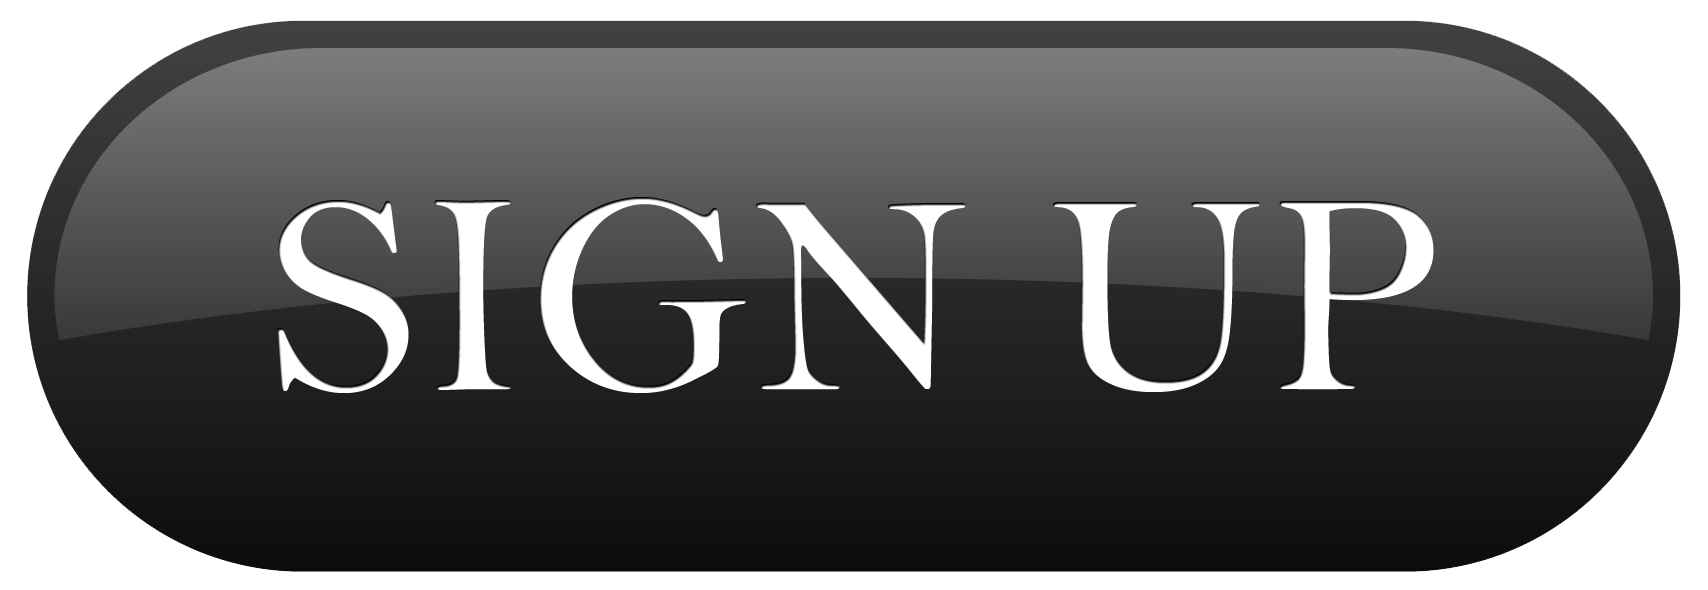 Sign Up Button Png Transparent Image - Sign Up Button, Transparent background PNG HD thumbnail